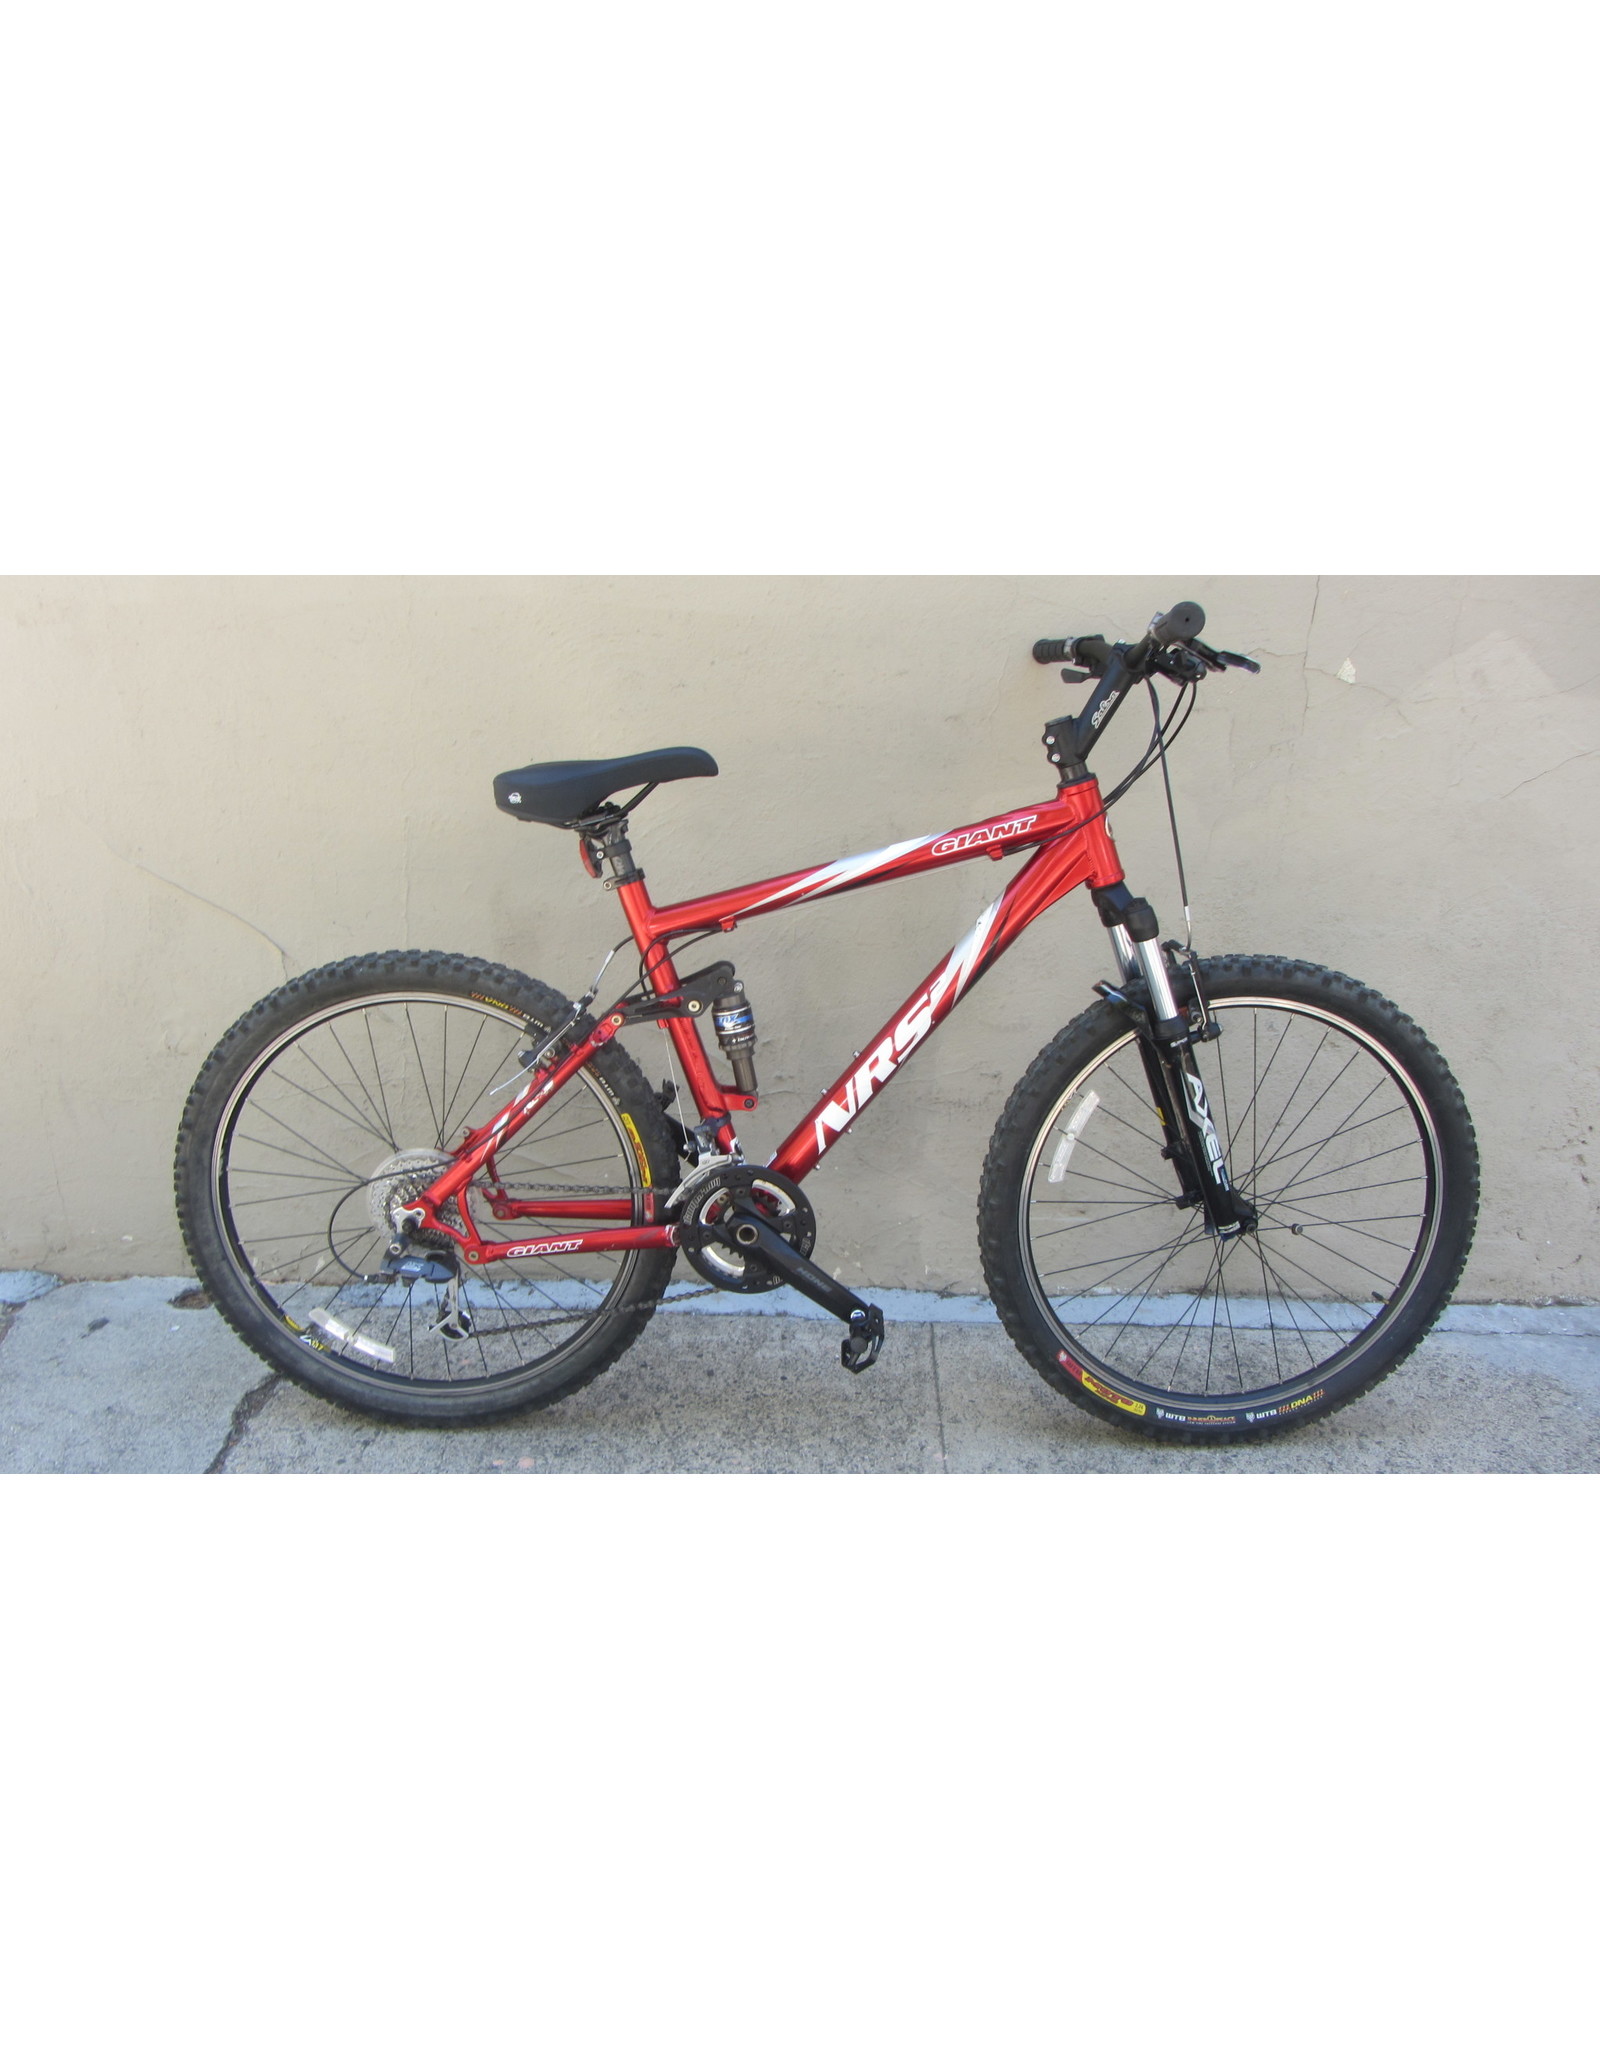 Giant Giant NRS 2, 2004, 19 Inches, Red